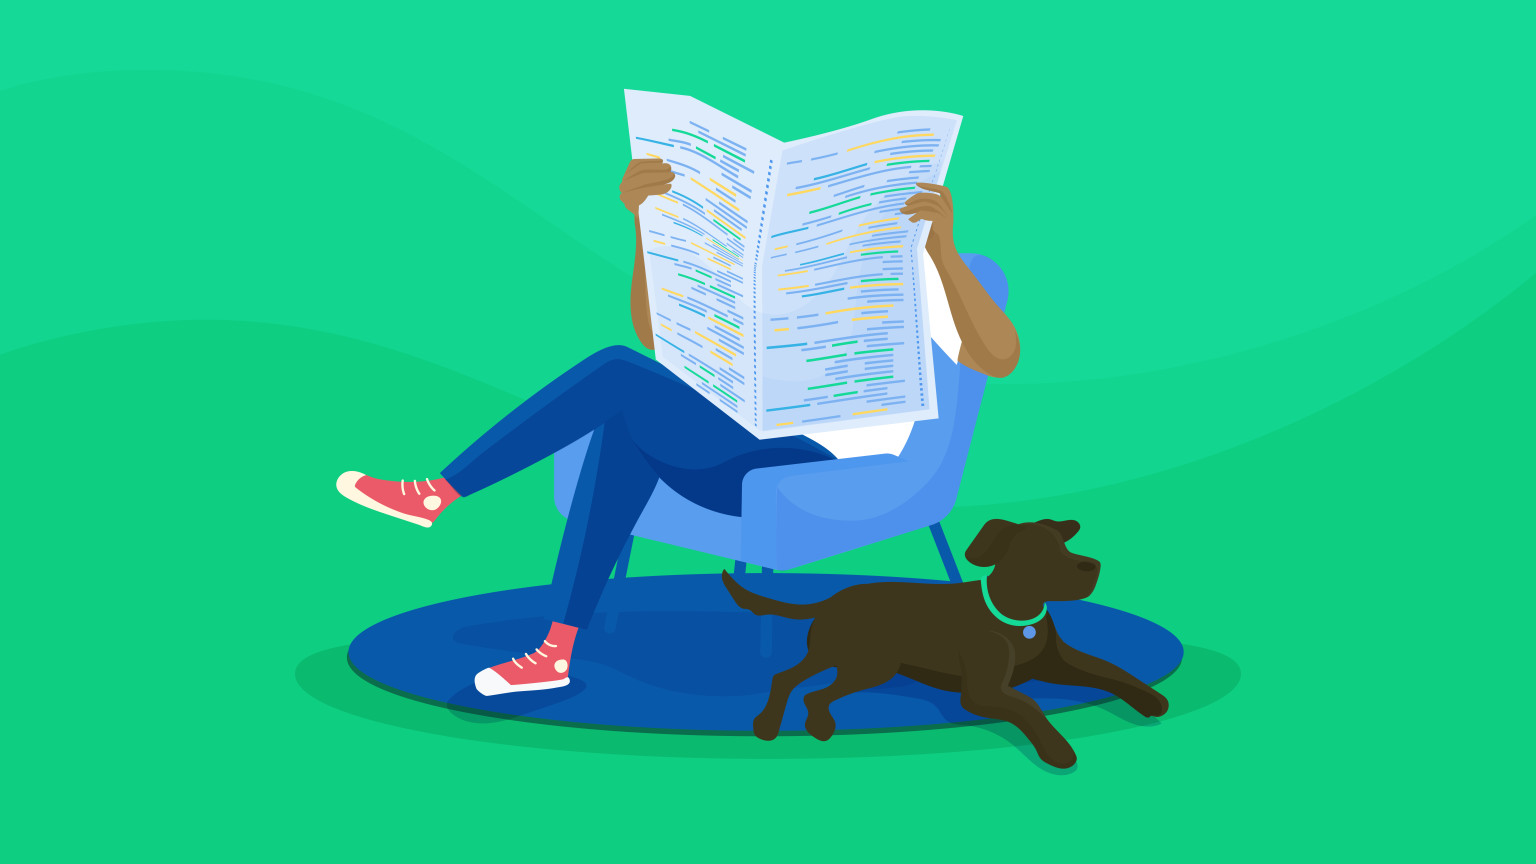 An illustration of a person sitting with a newspaper with code written on its cover, a dog sitting at their heels.